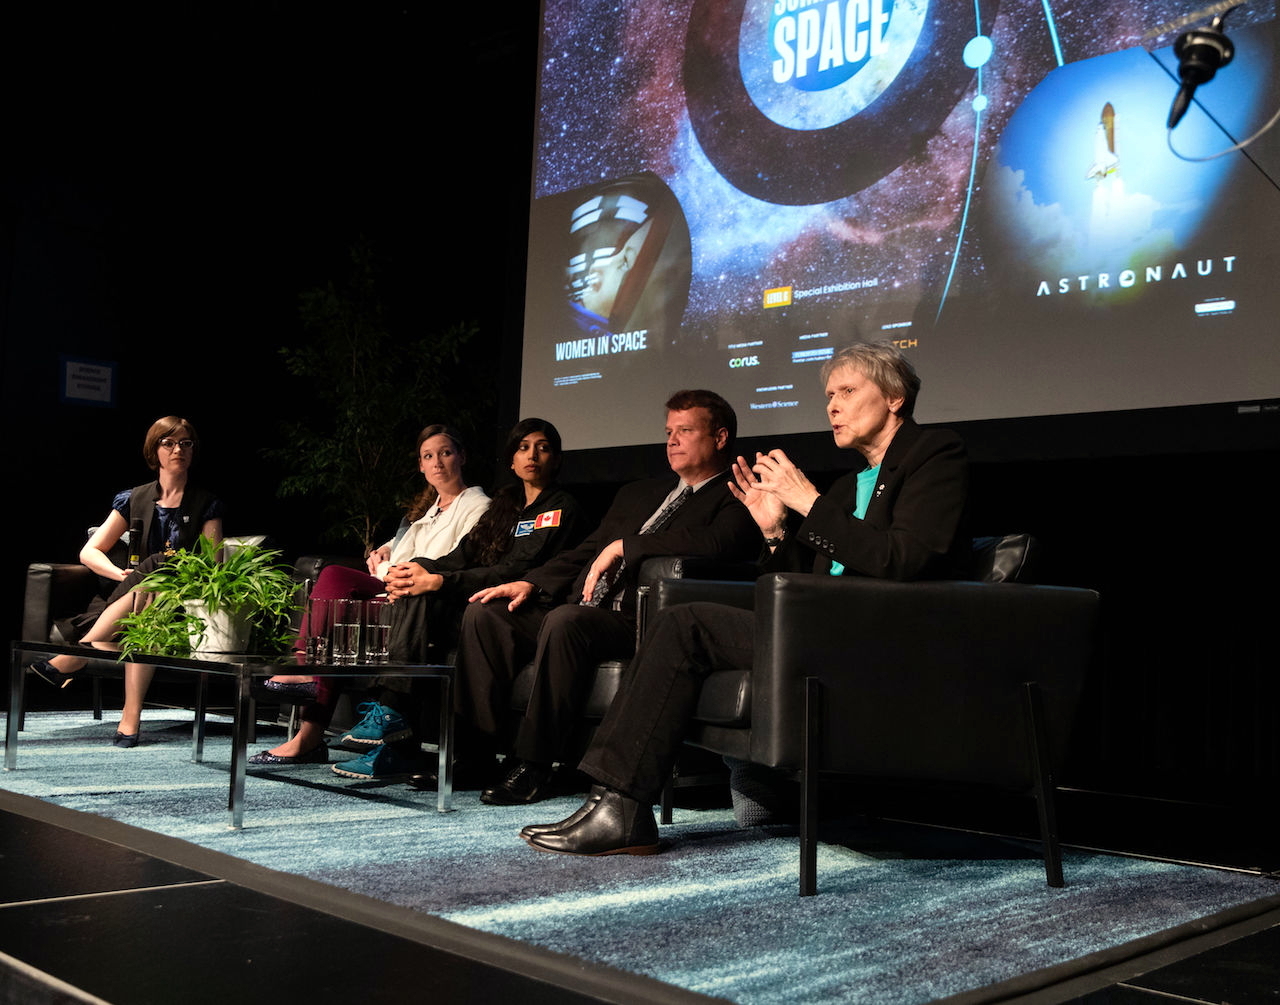 Image of a panel of people on stage